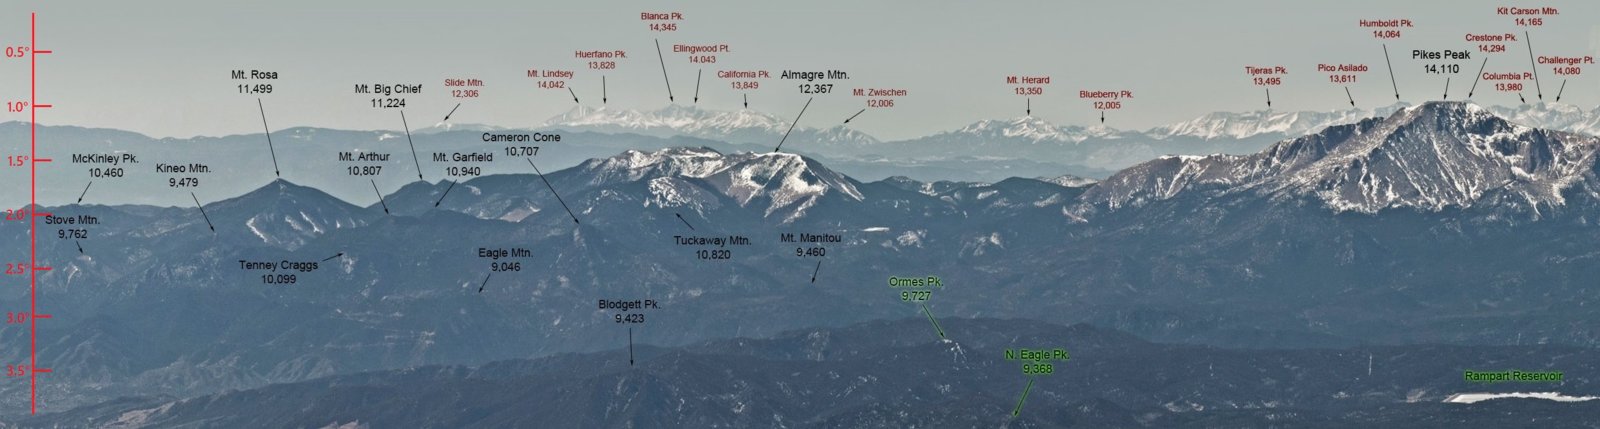 front range panorama with scale.jpg